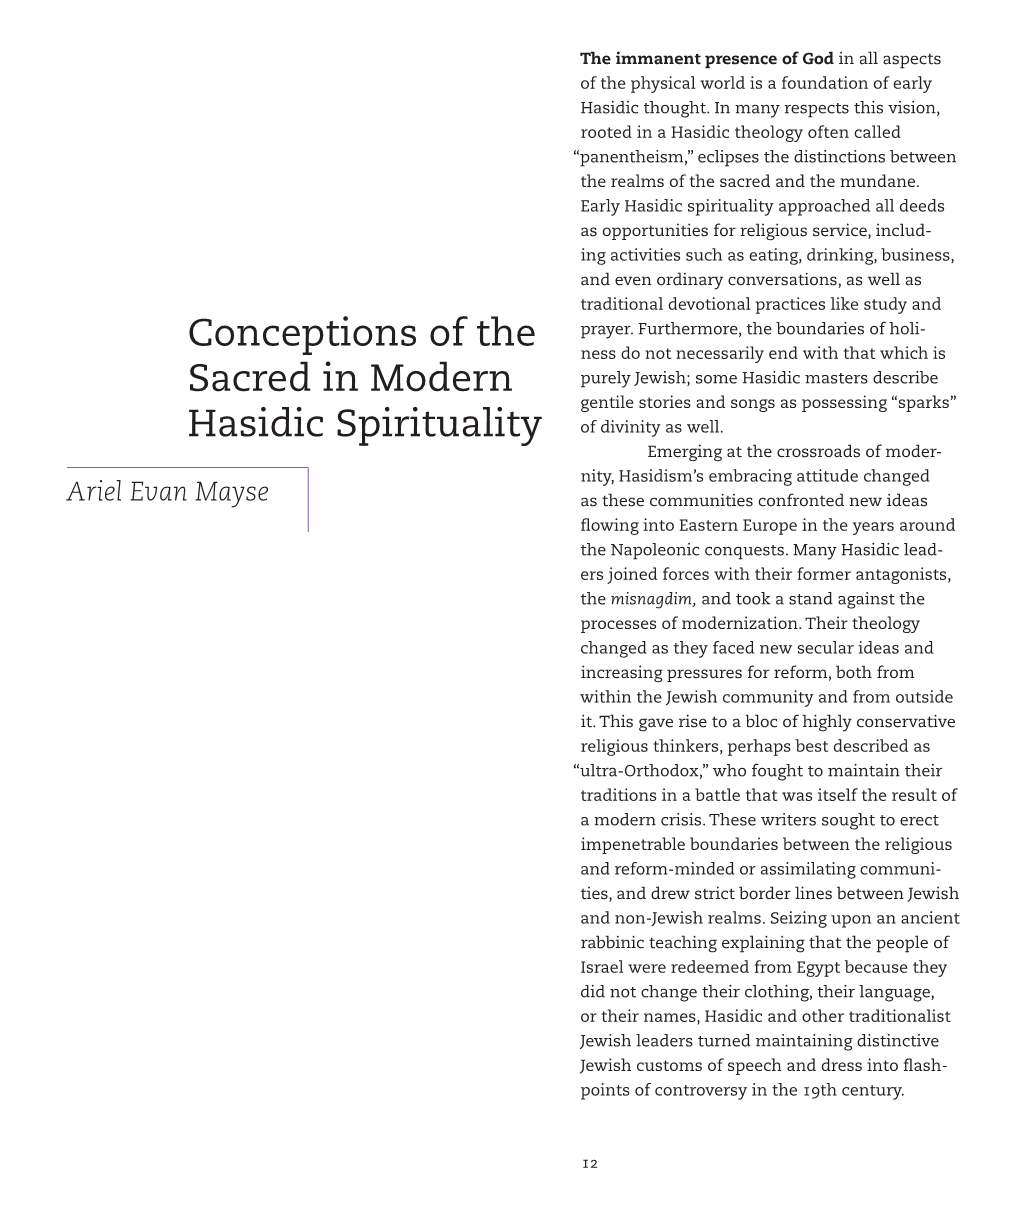 Conceptions of the Sacred in Modern Hasidic Spirituality